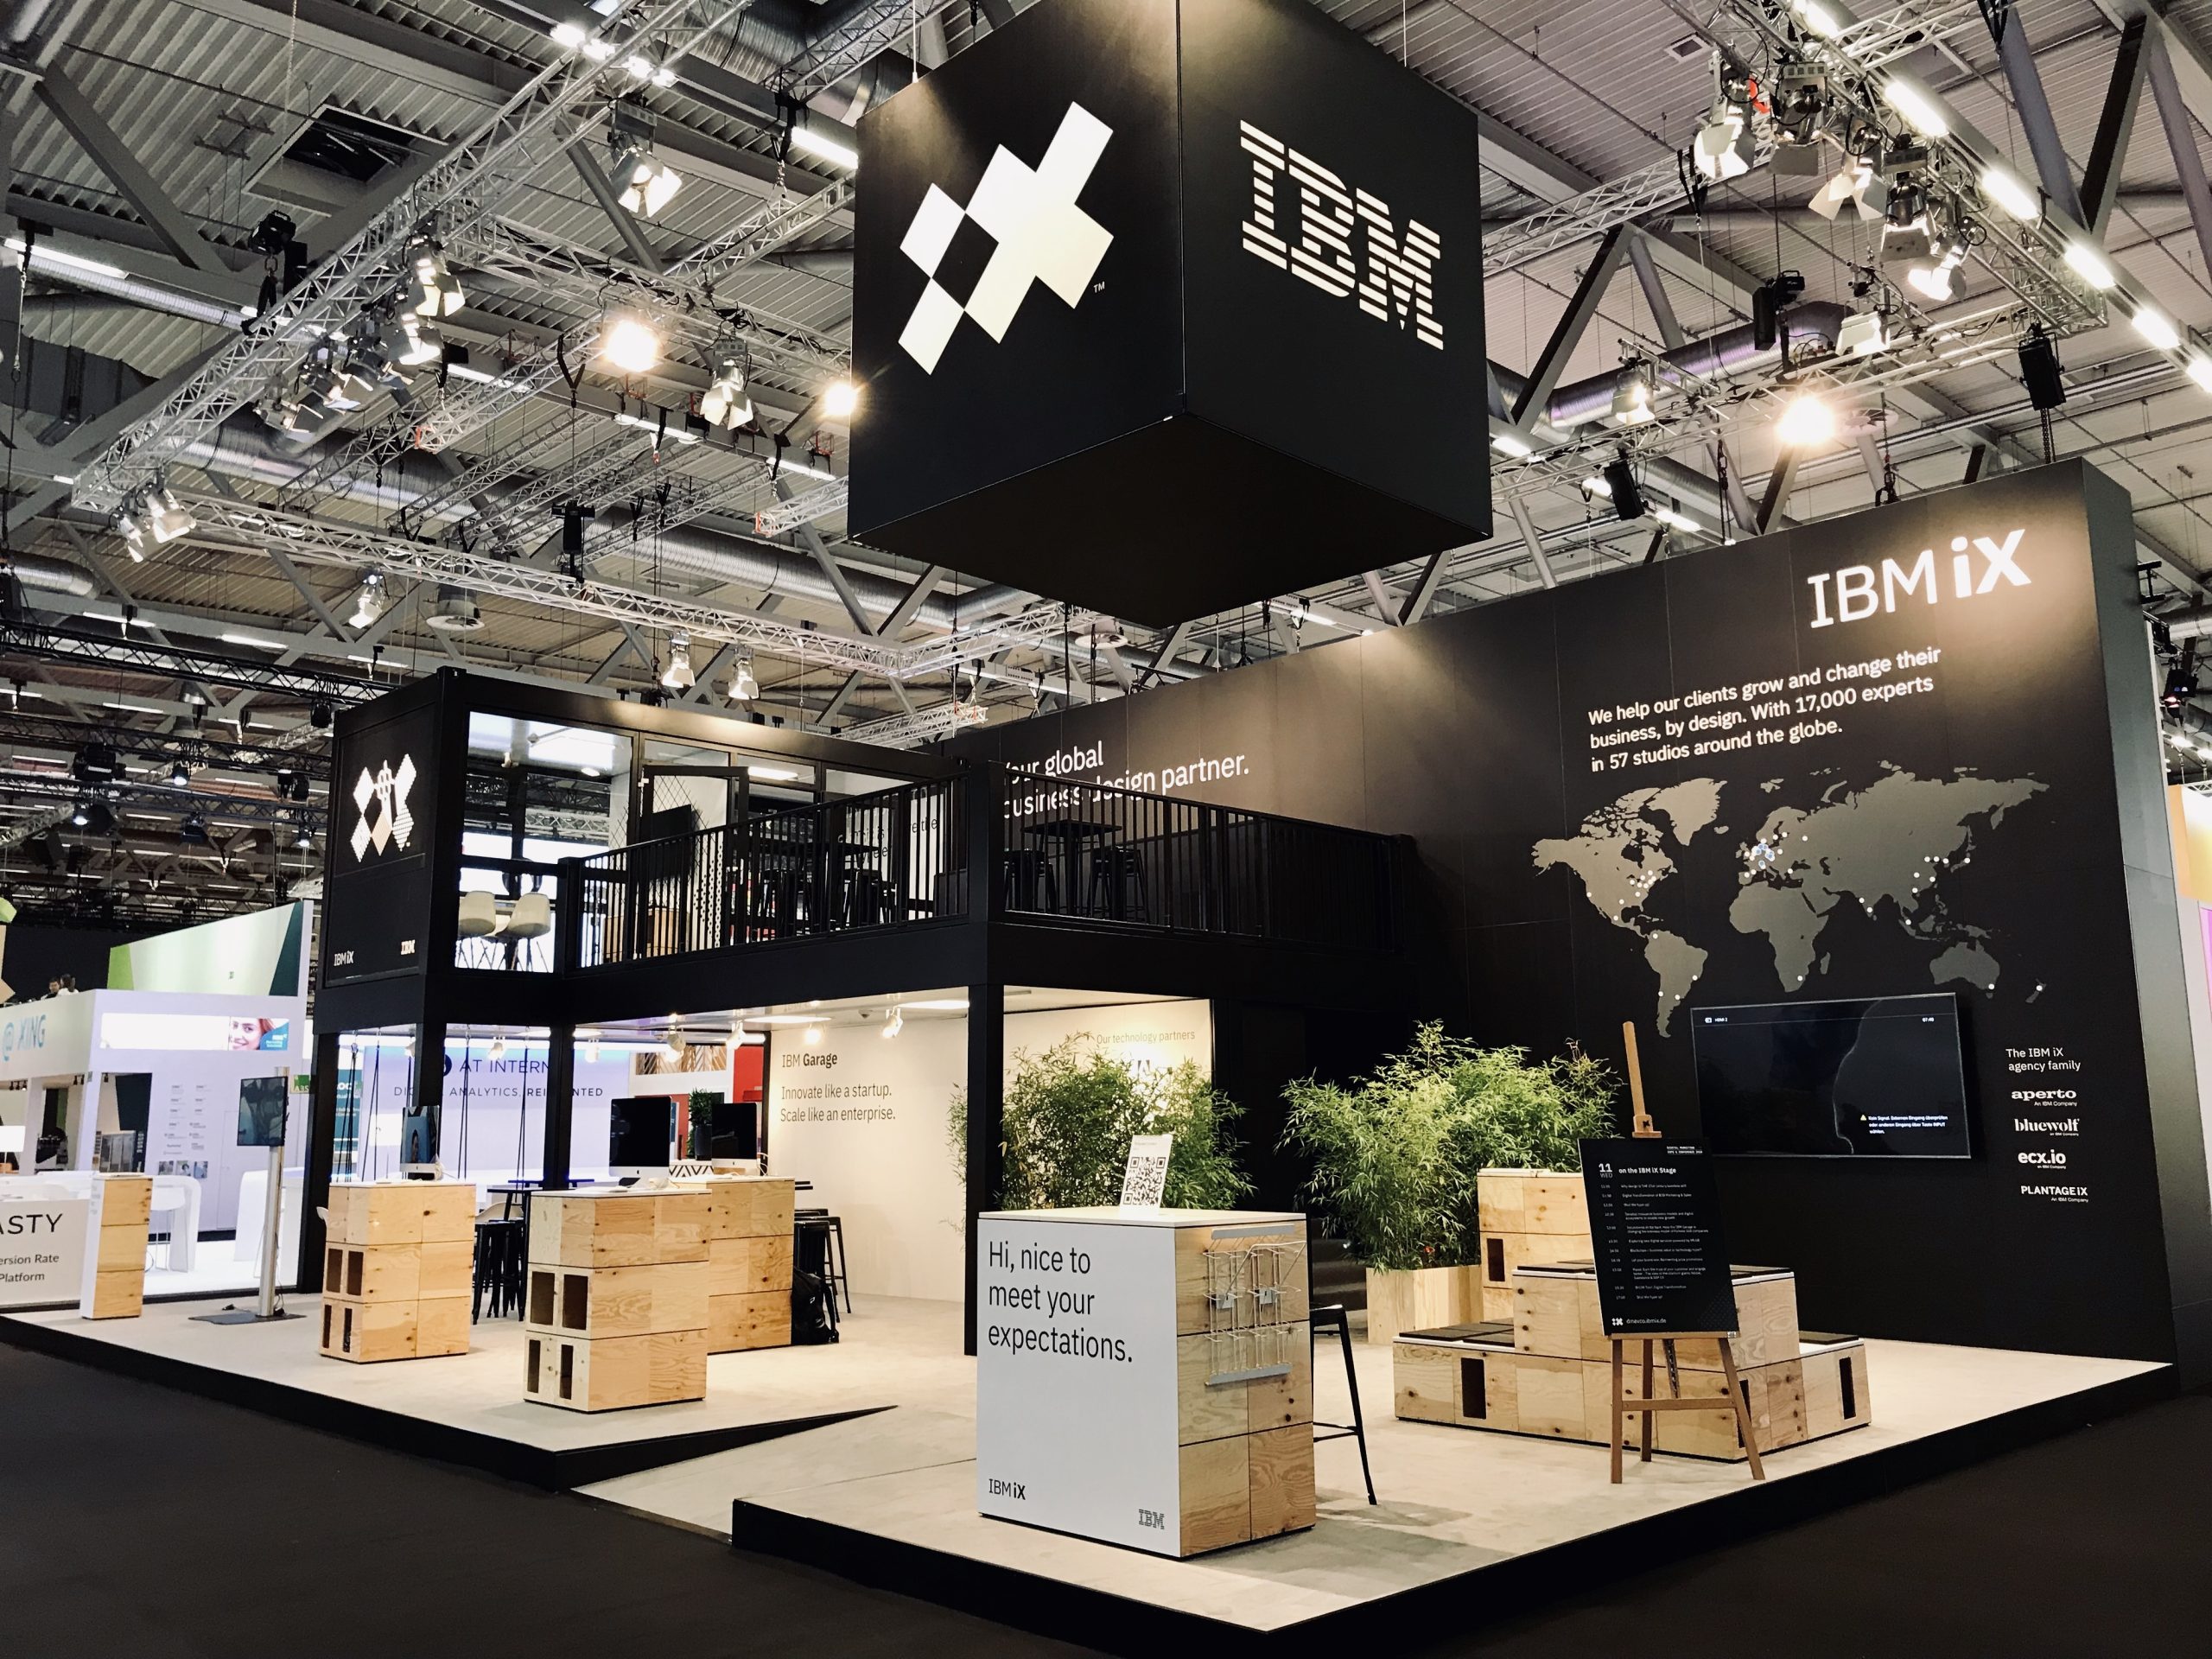 IBM iX booth at DMEXCO 2019 with branding and logo